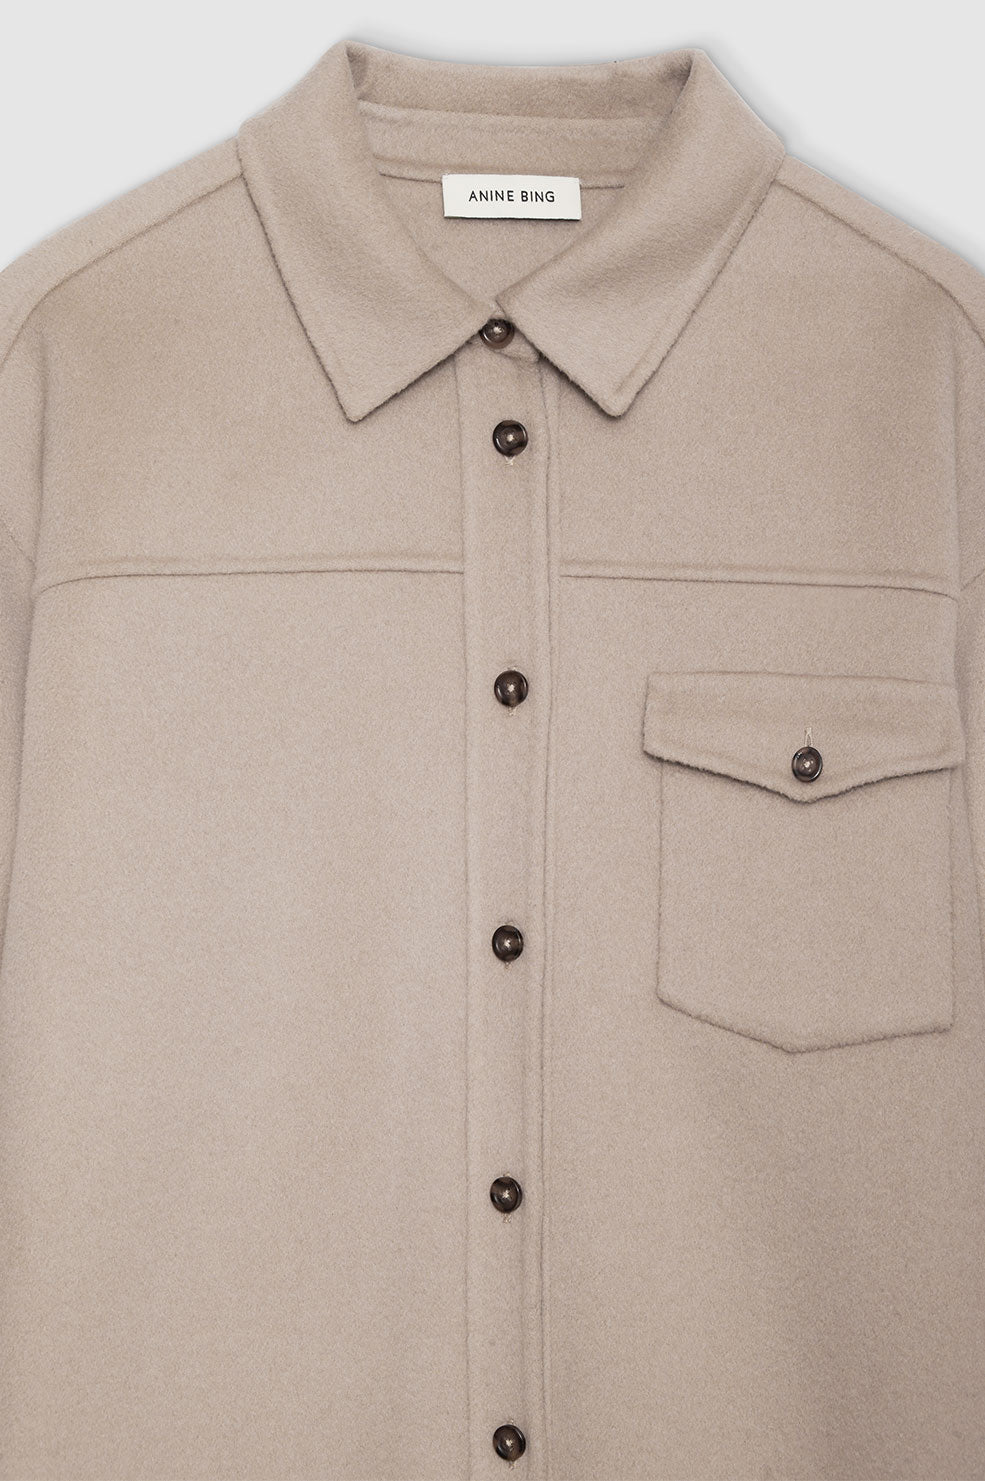 ANINE BING Sloan Shirt - Taupe Cashmere Blend - Detail View